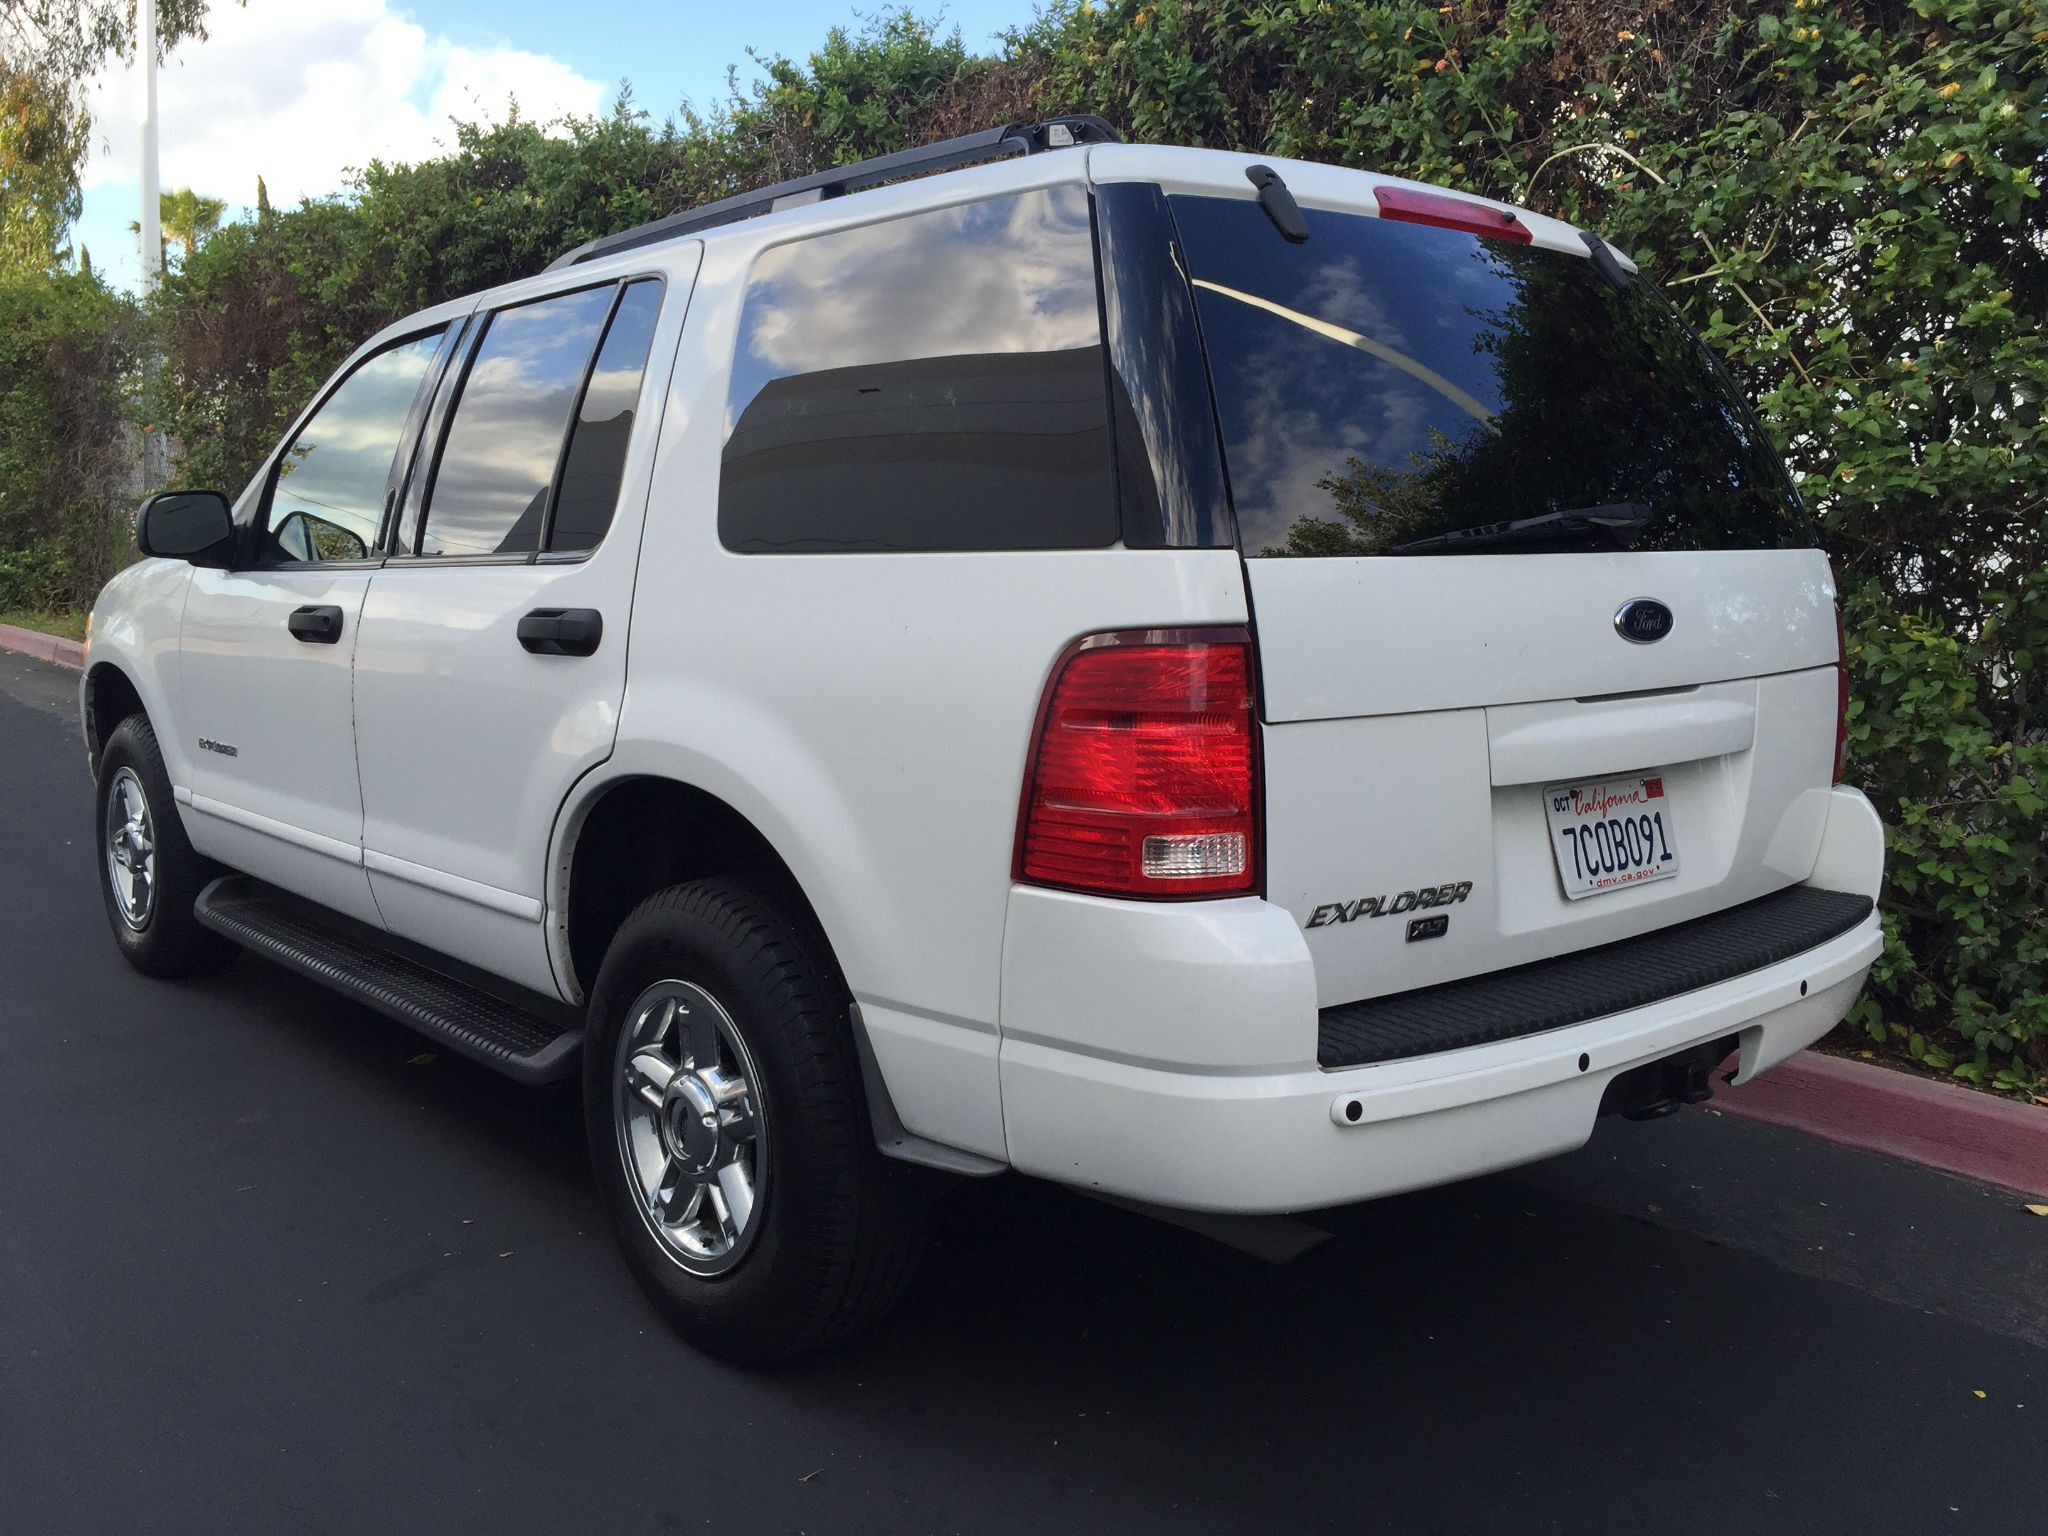 Used 2004 Ford Explorer XLT at City Cars Warehouse INC